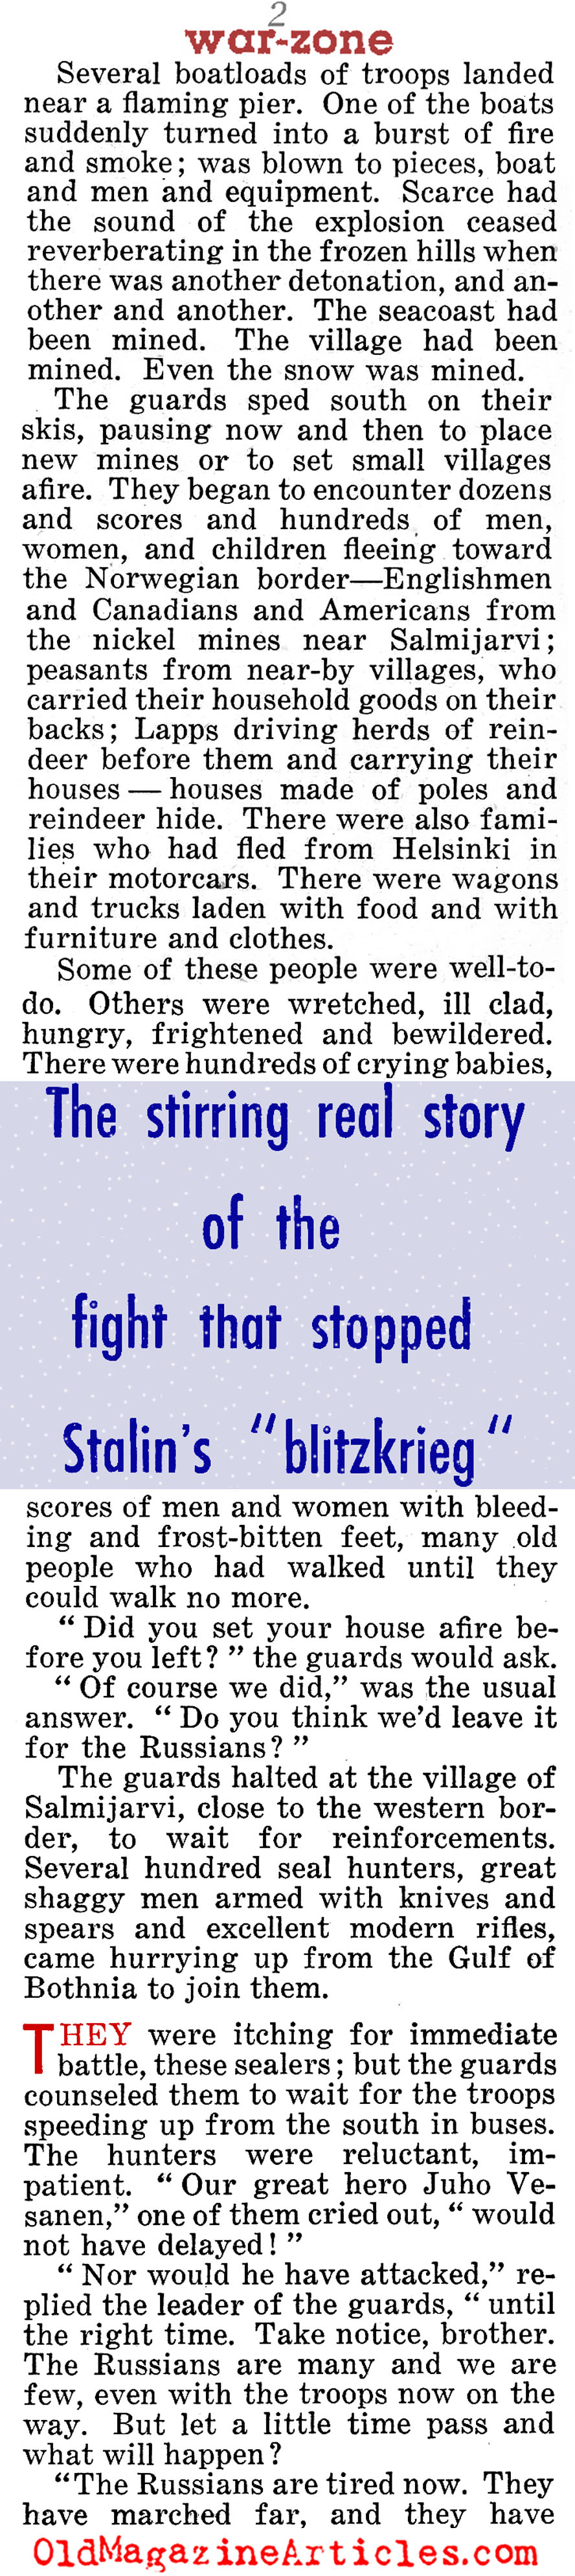 The War in Northern Finland<BR> (Liberty Magazine, 1940)